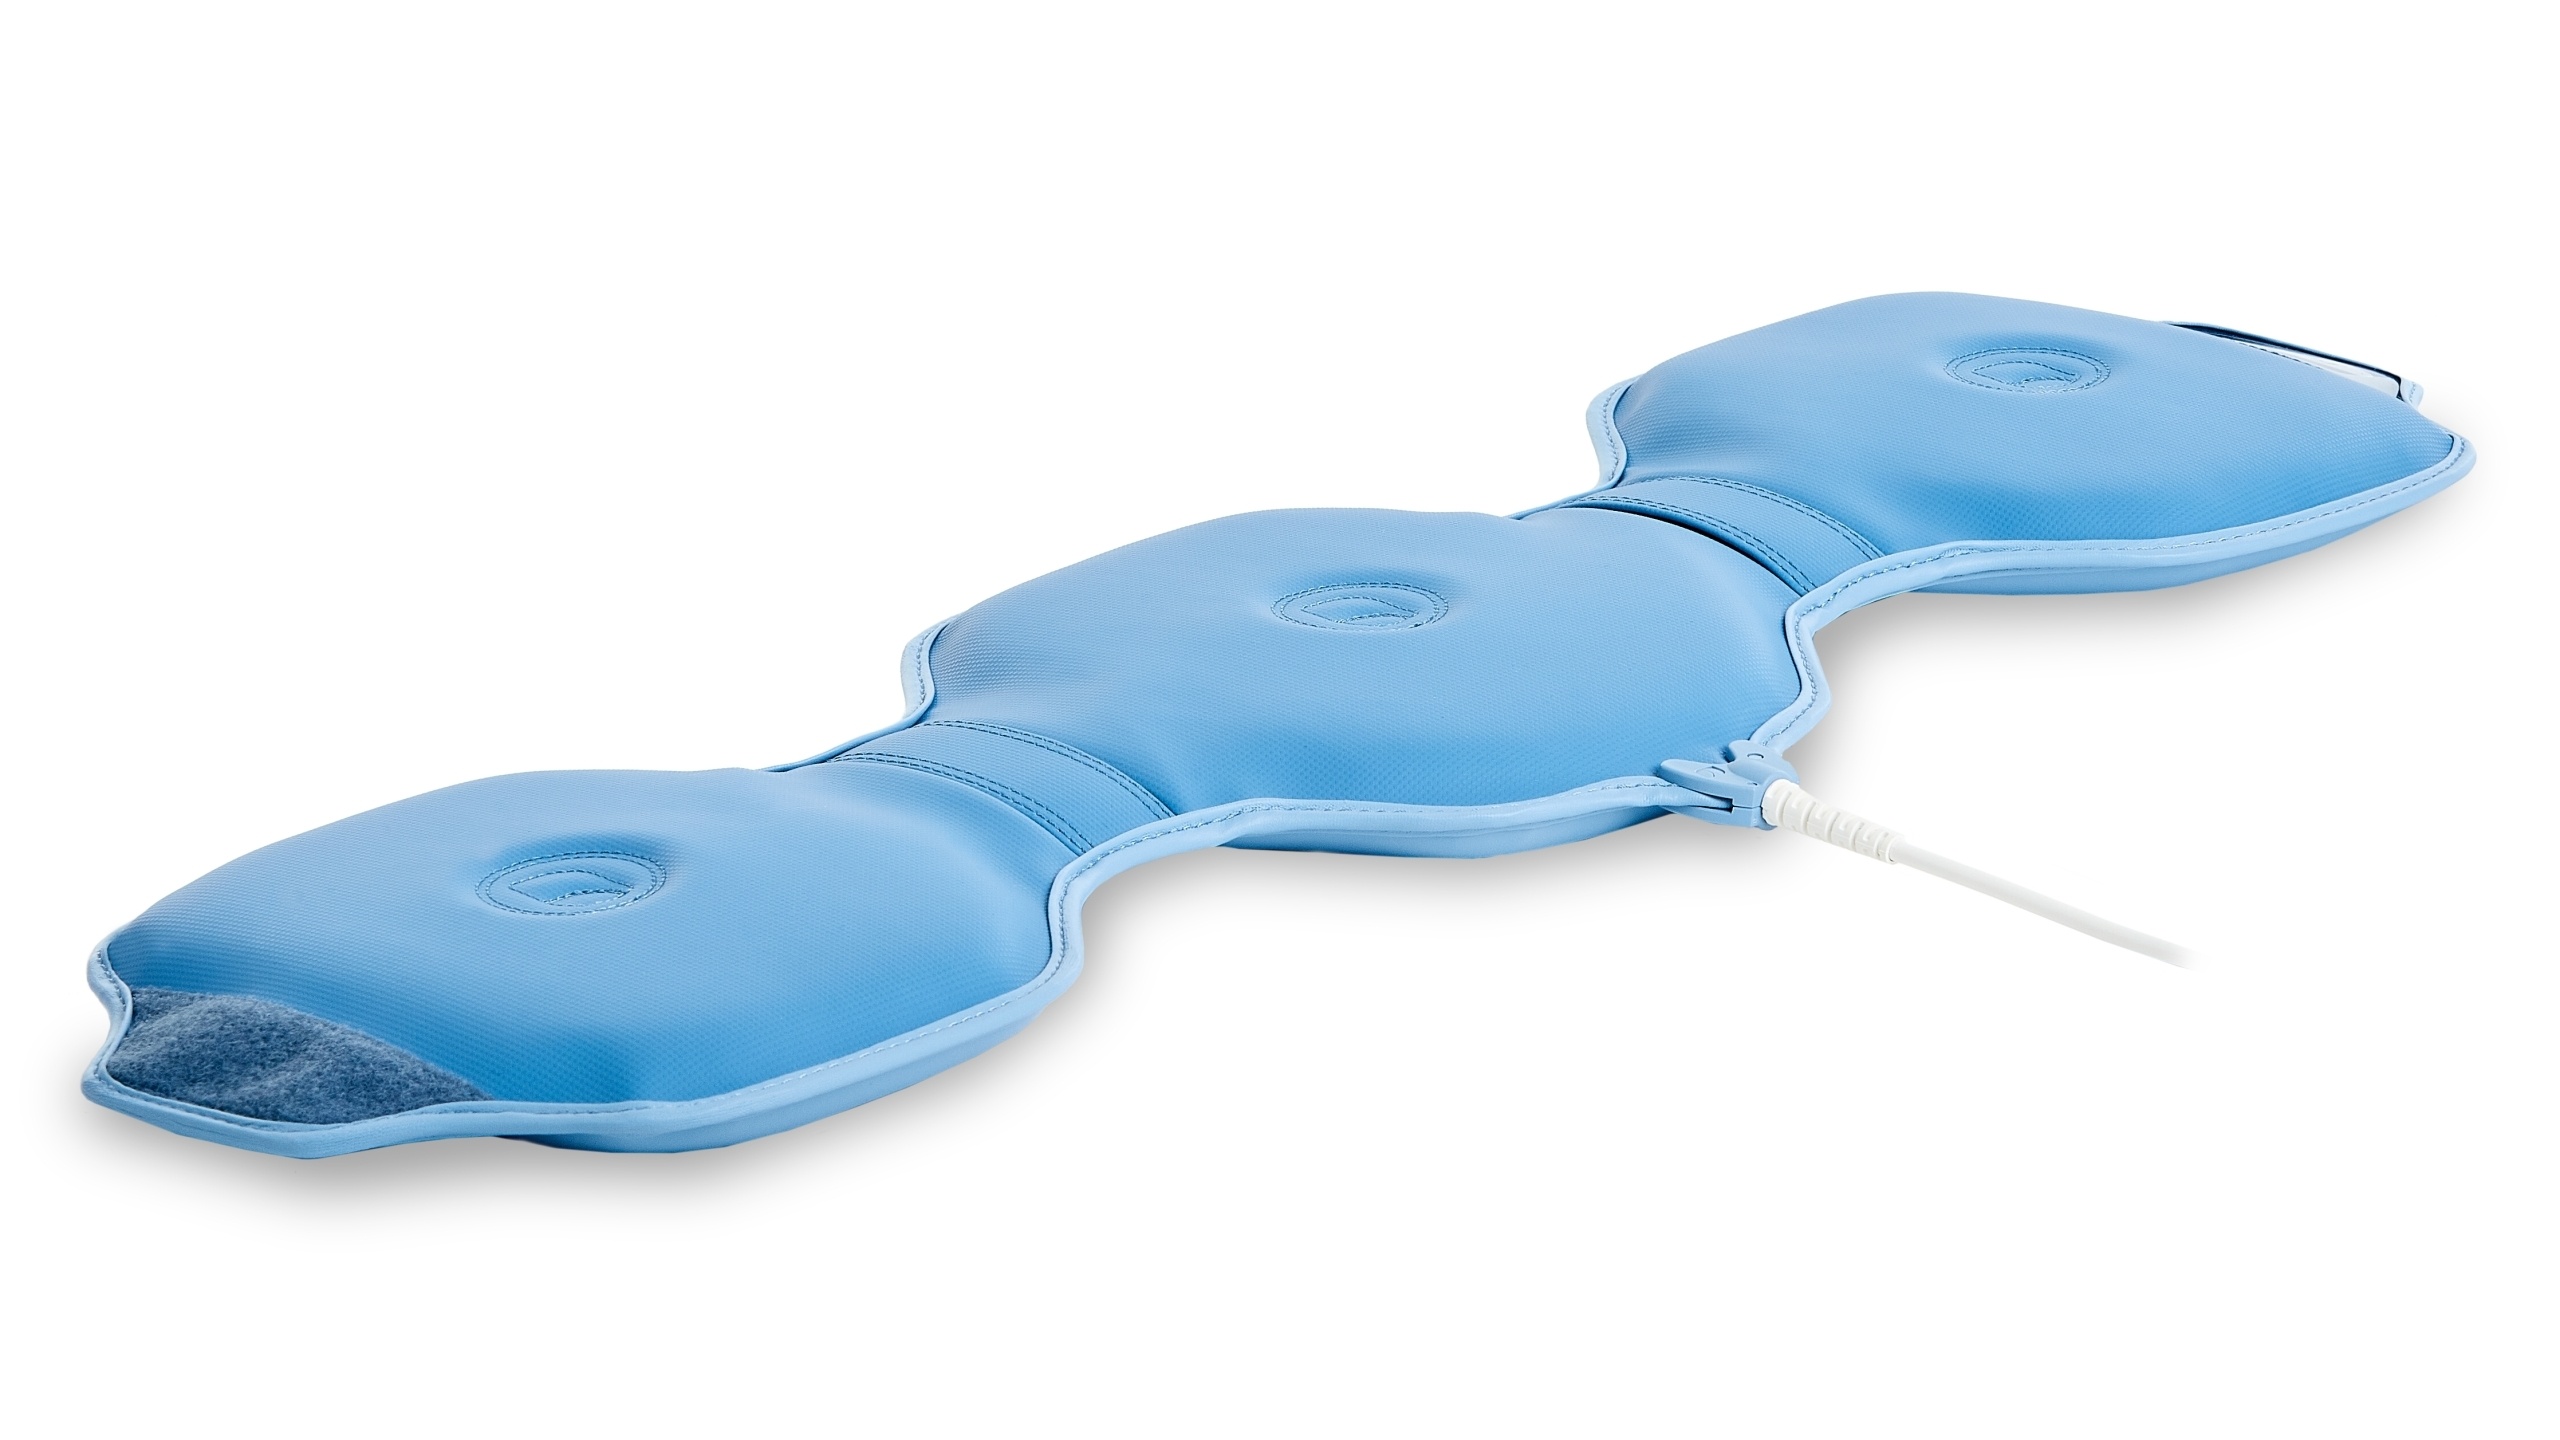 Magnetic therapy applicator A17P for applications in a reclining postition. When folded, it helps itensify treatment for the targeted body part.